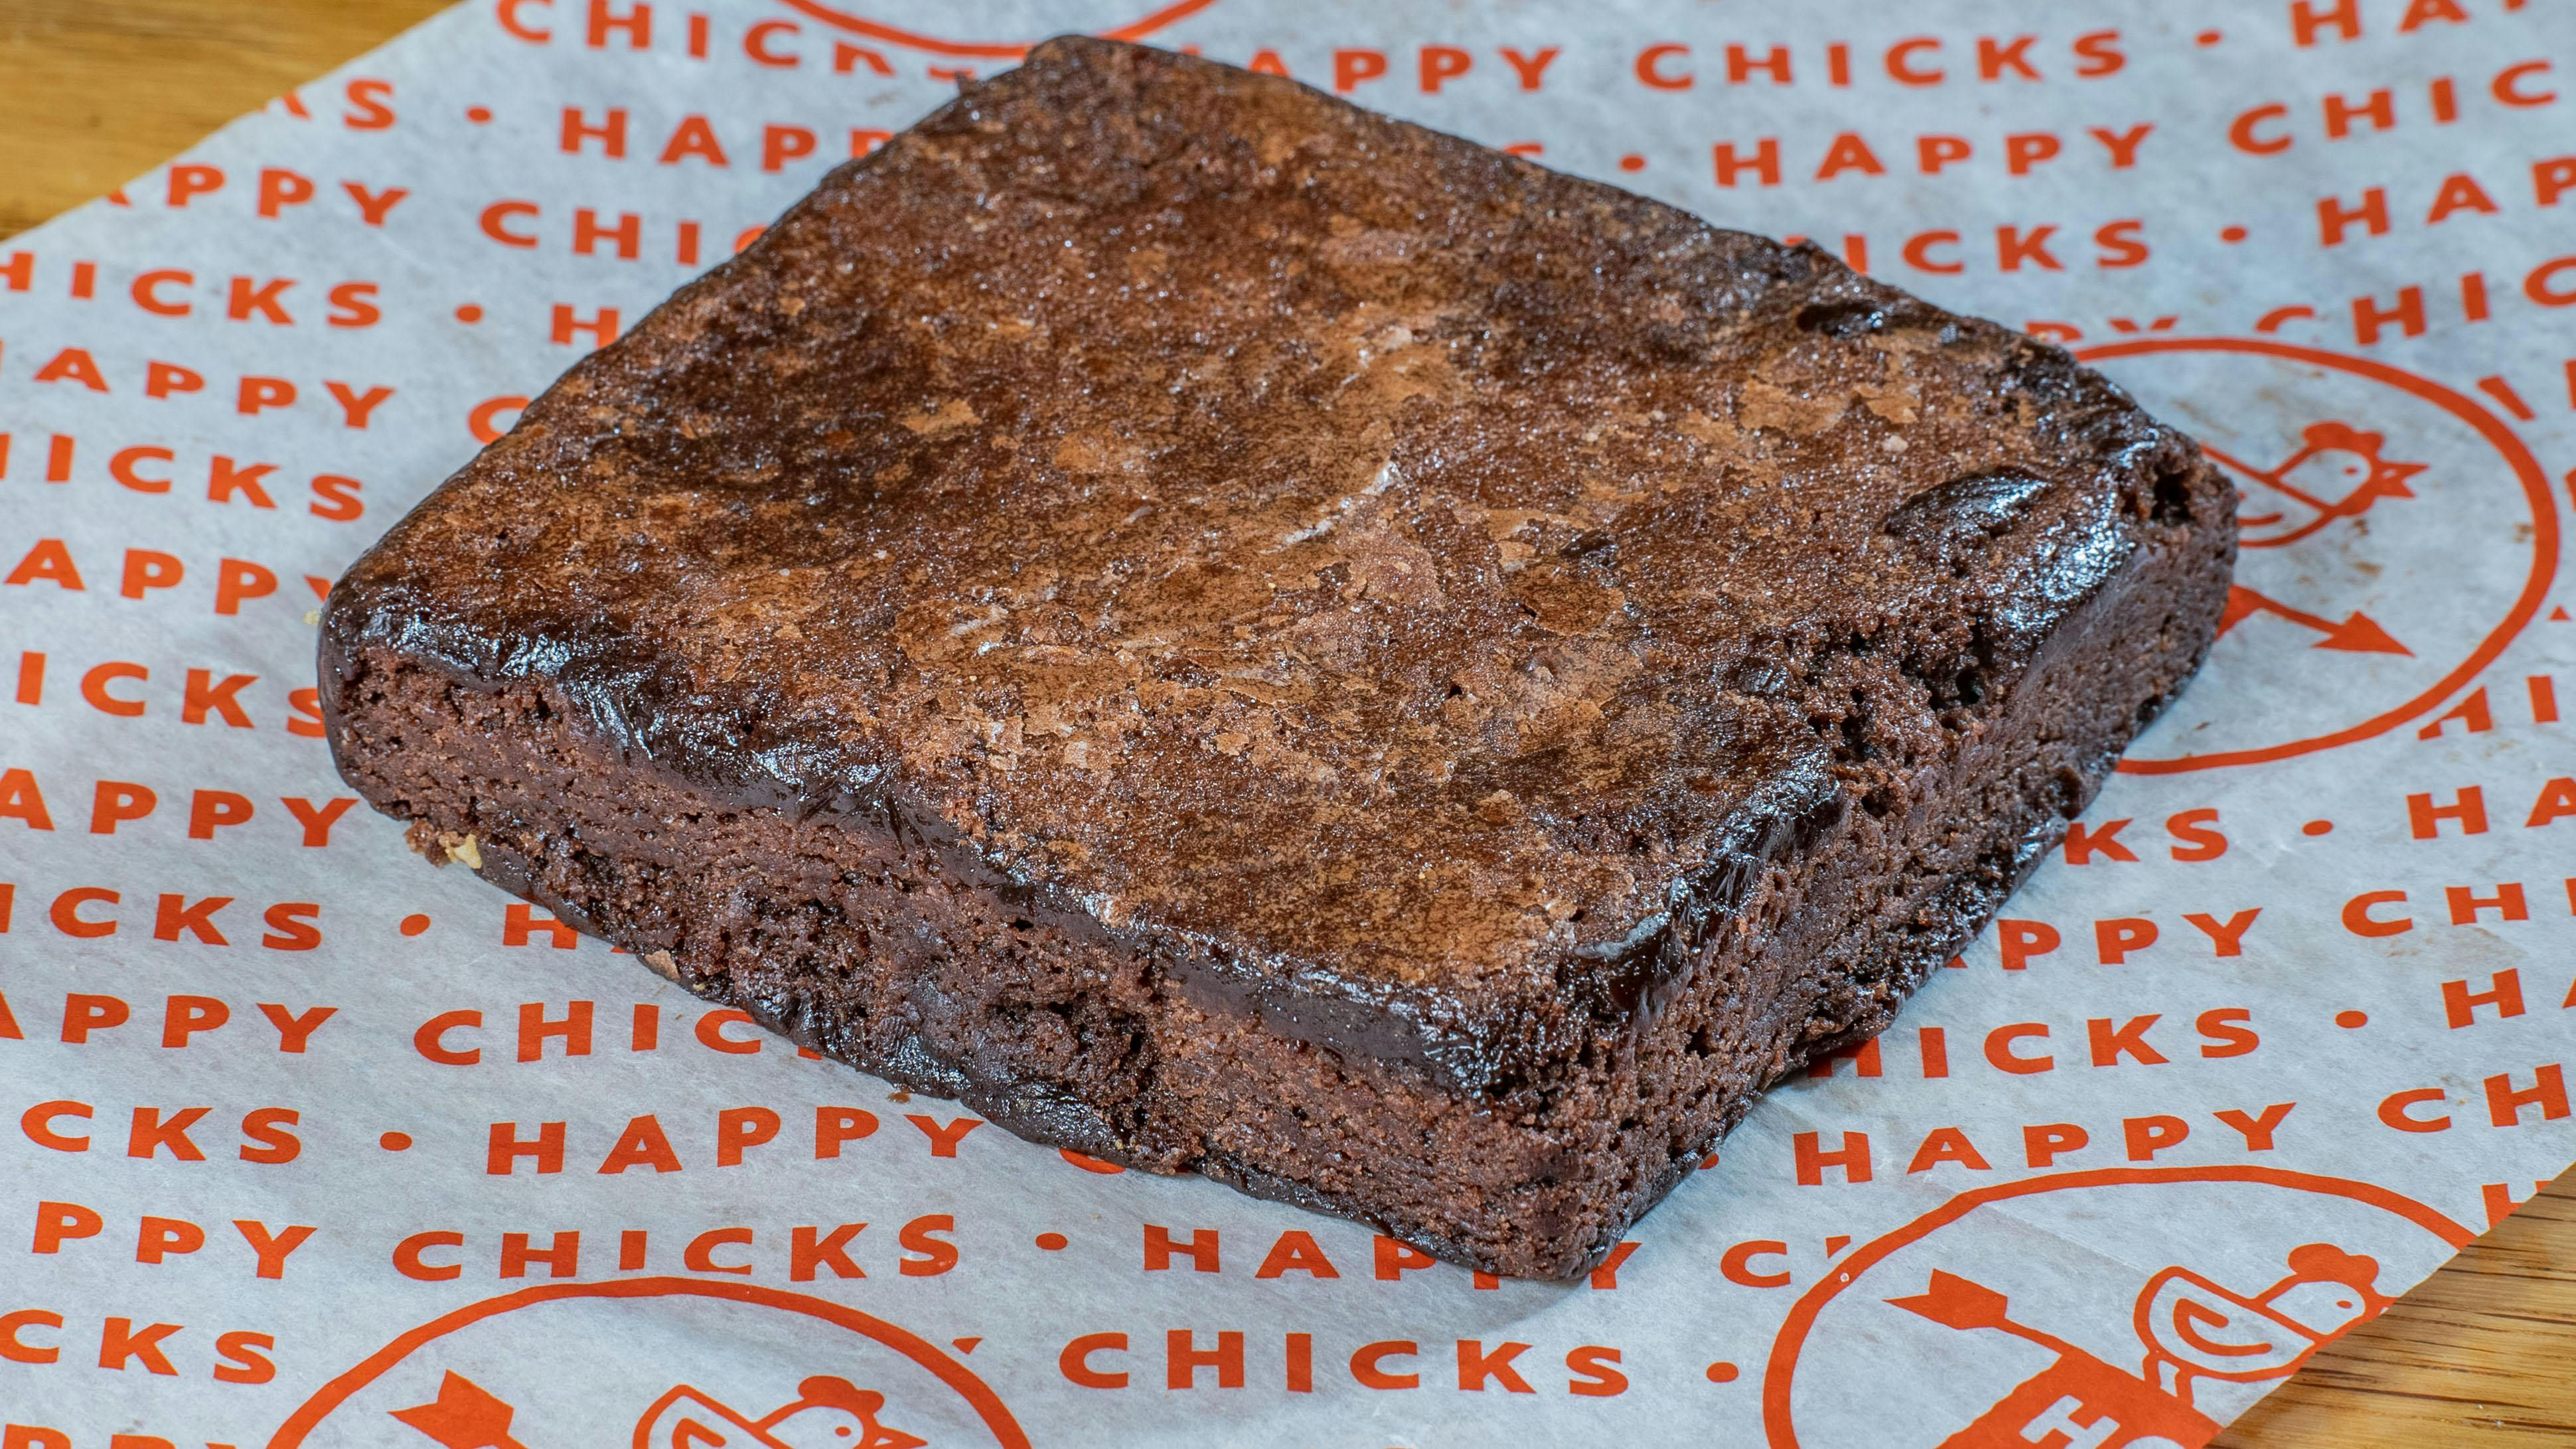 Brownie from Happy Chicks - Burnet Rd in Austin, TX